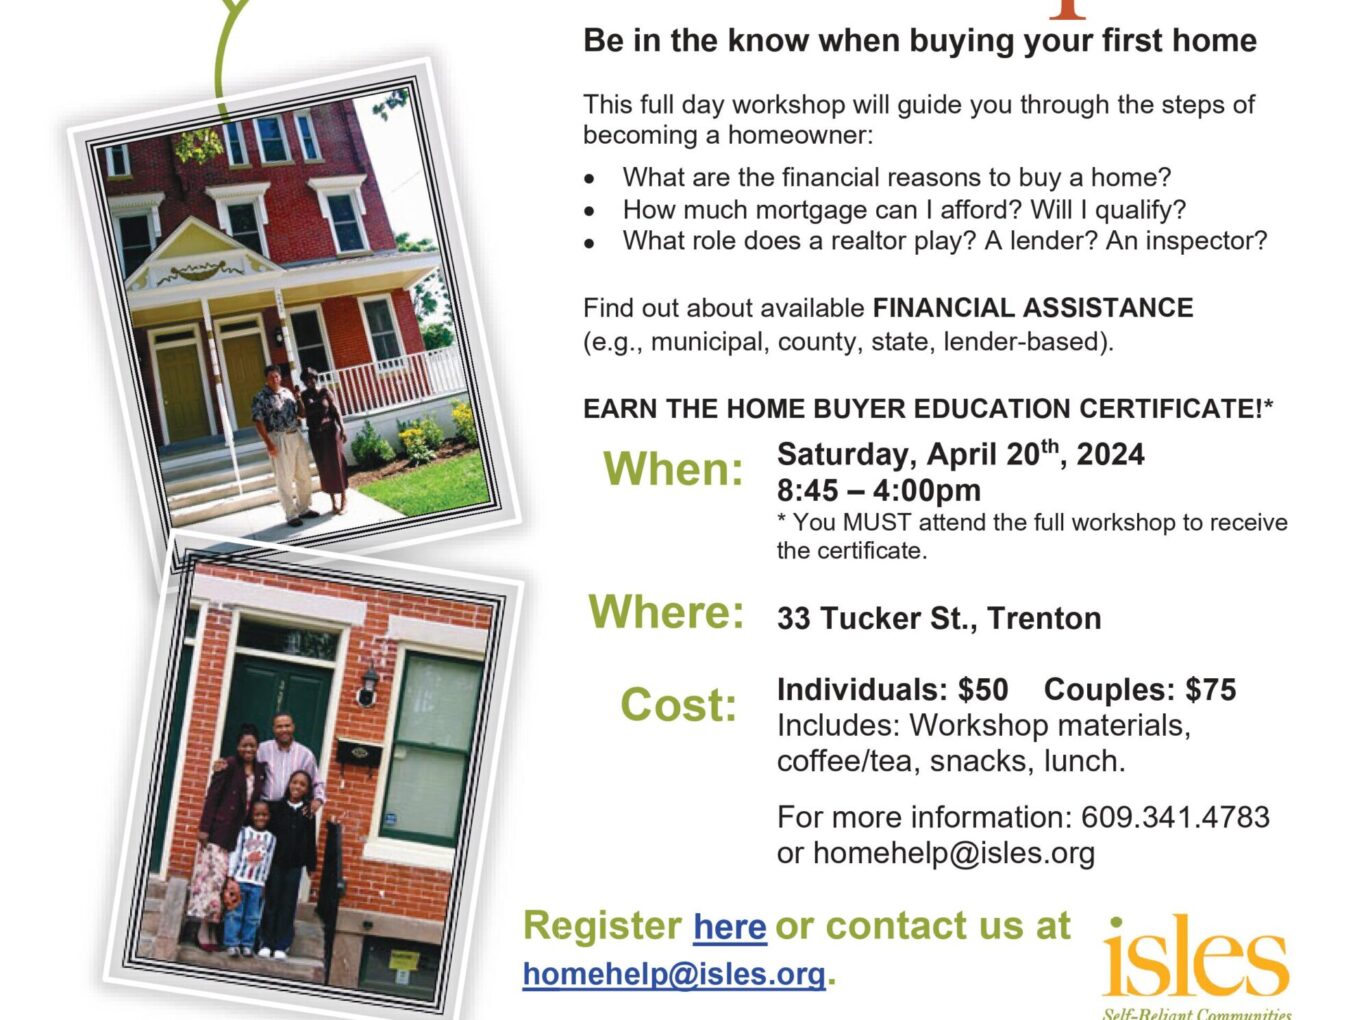 Isles to Host Upcoming First Time Homebuyers Workshop